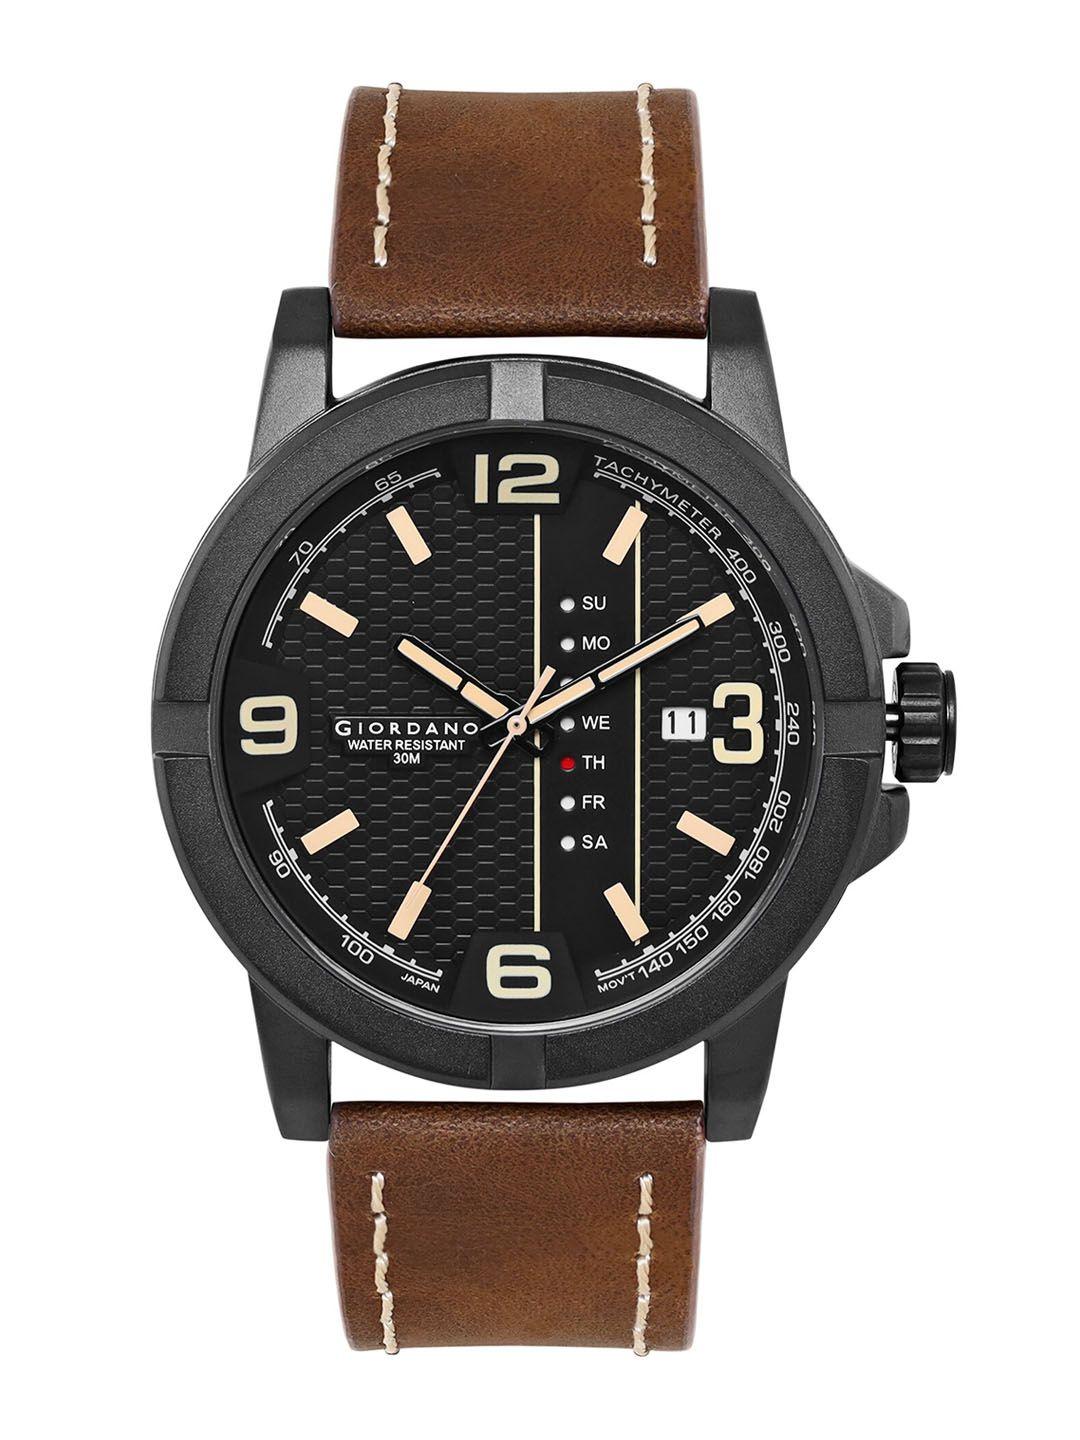 GIORDANO Men Dial & Leather Straps Analogue Watch GD-50007-01